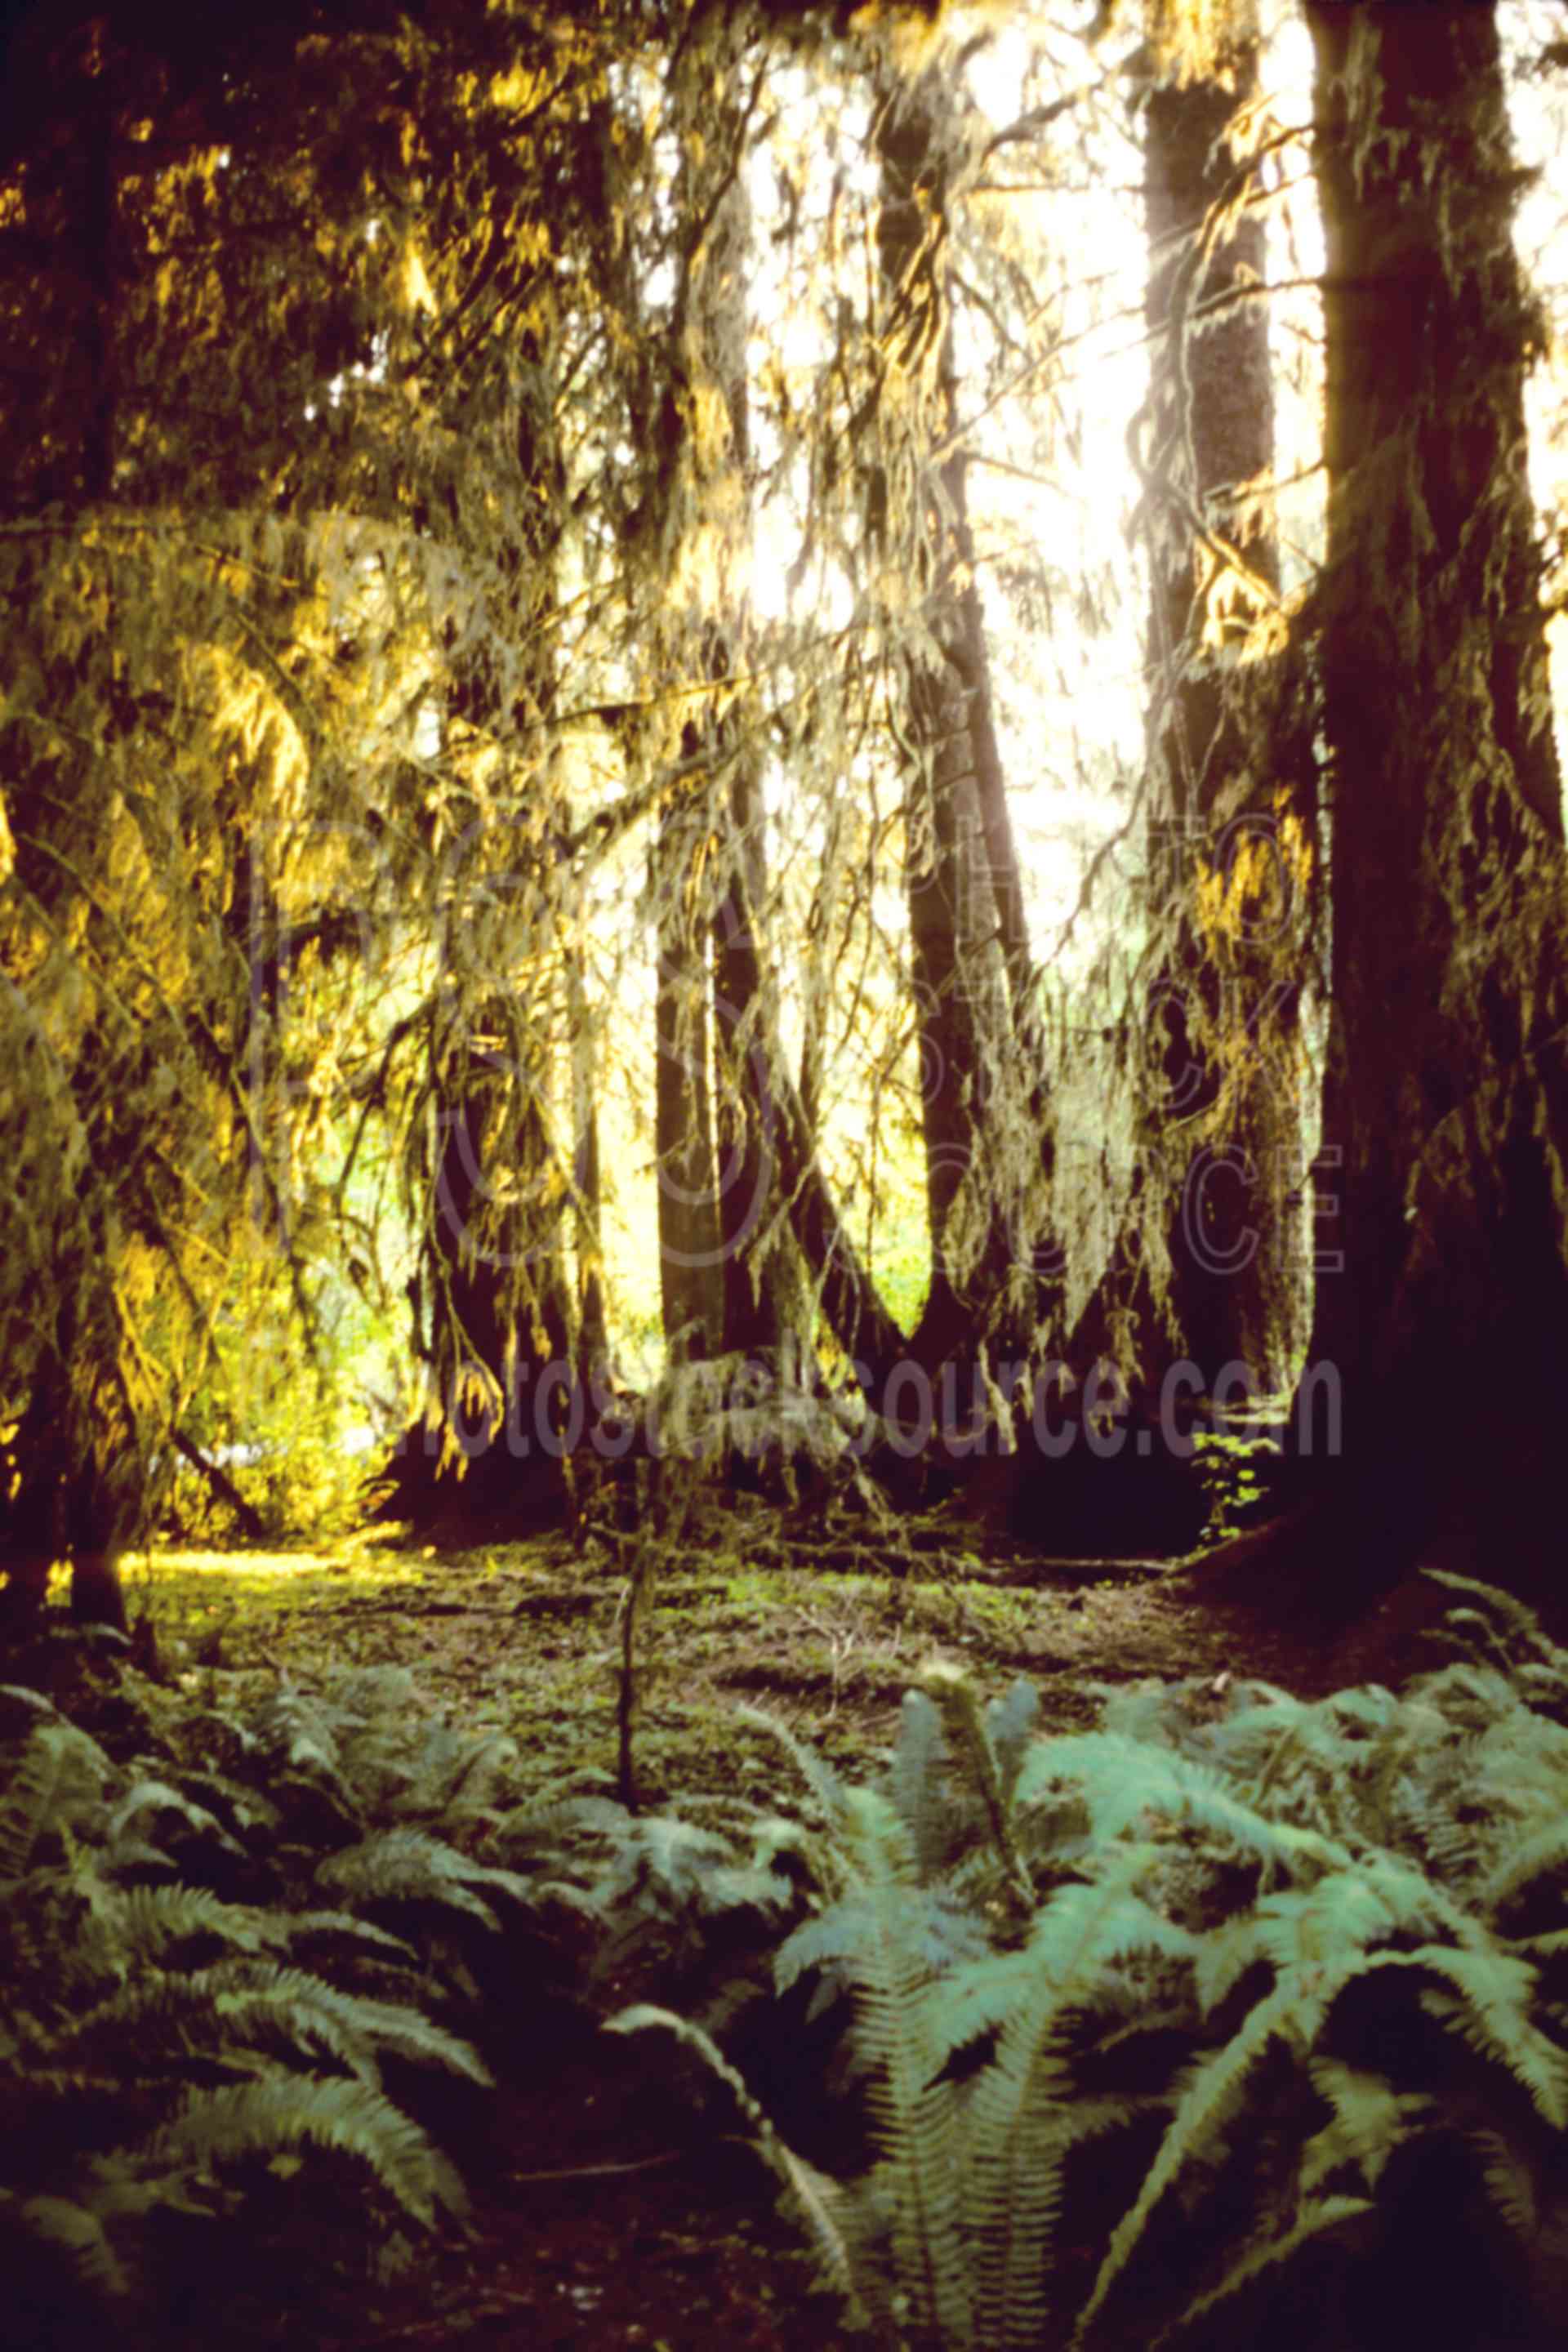 Rain Forest,hoh river,usas,forests,lakes rivers,nature